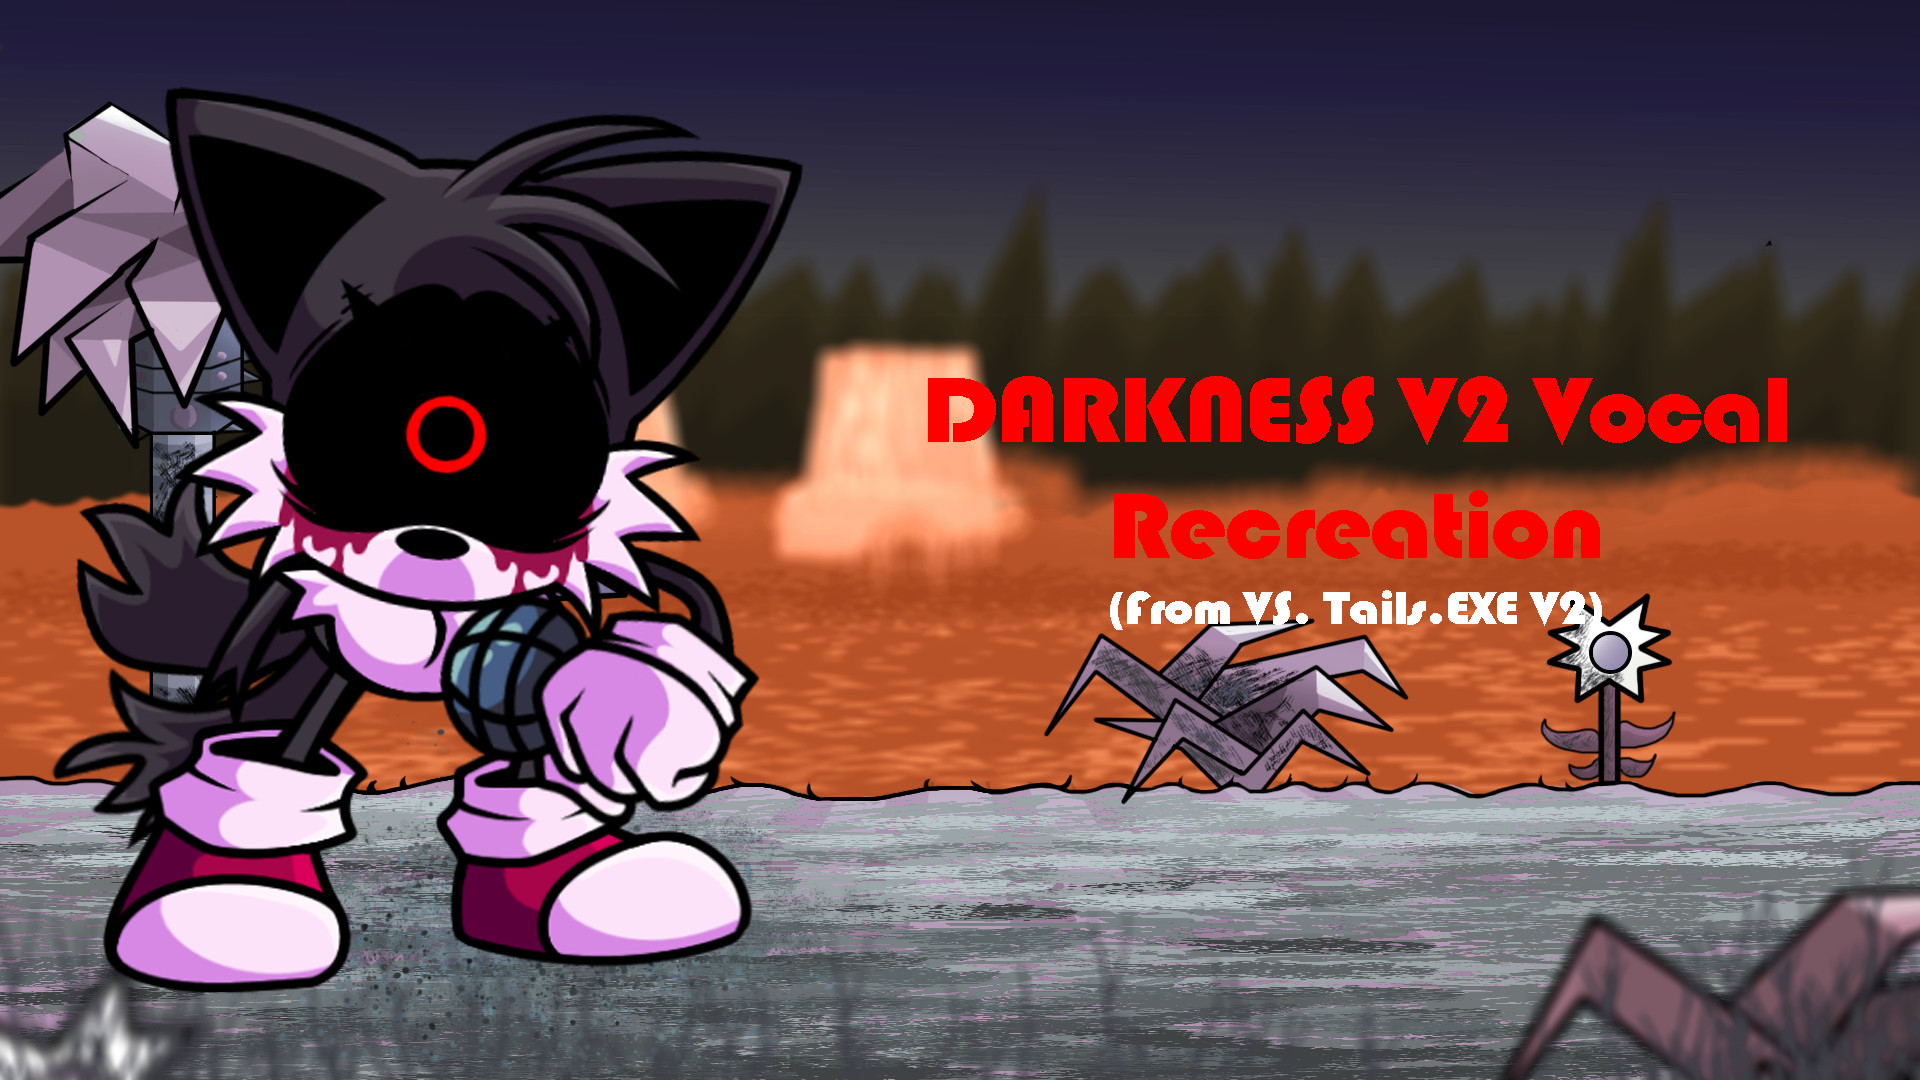 Mostly)Accurated Darkness V2 Vocal Recreation [Friday Night Funkin']  [Modding Tools]